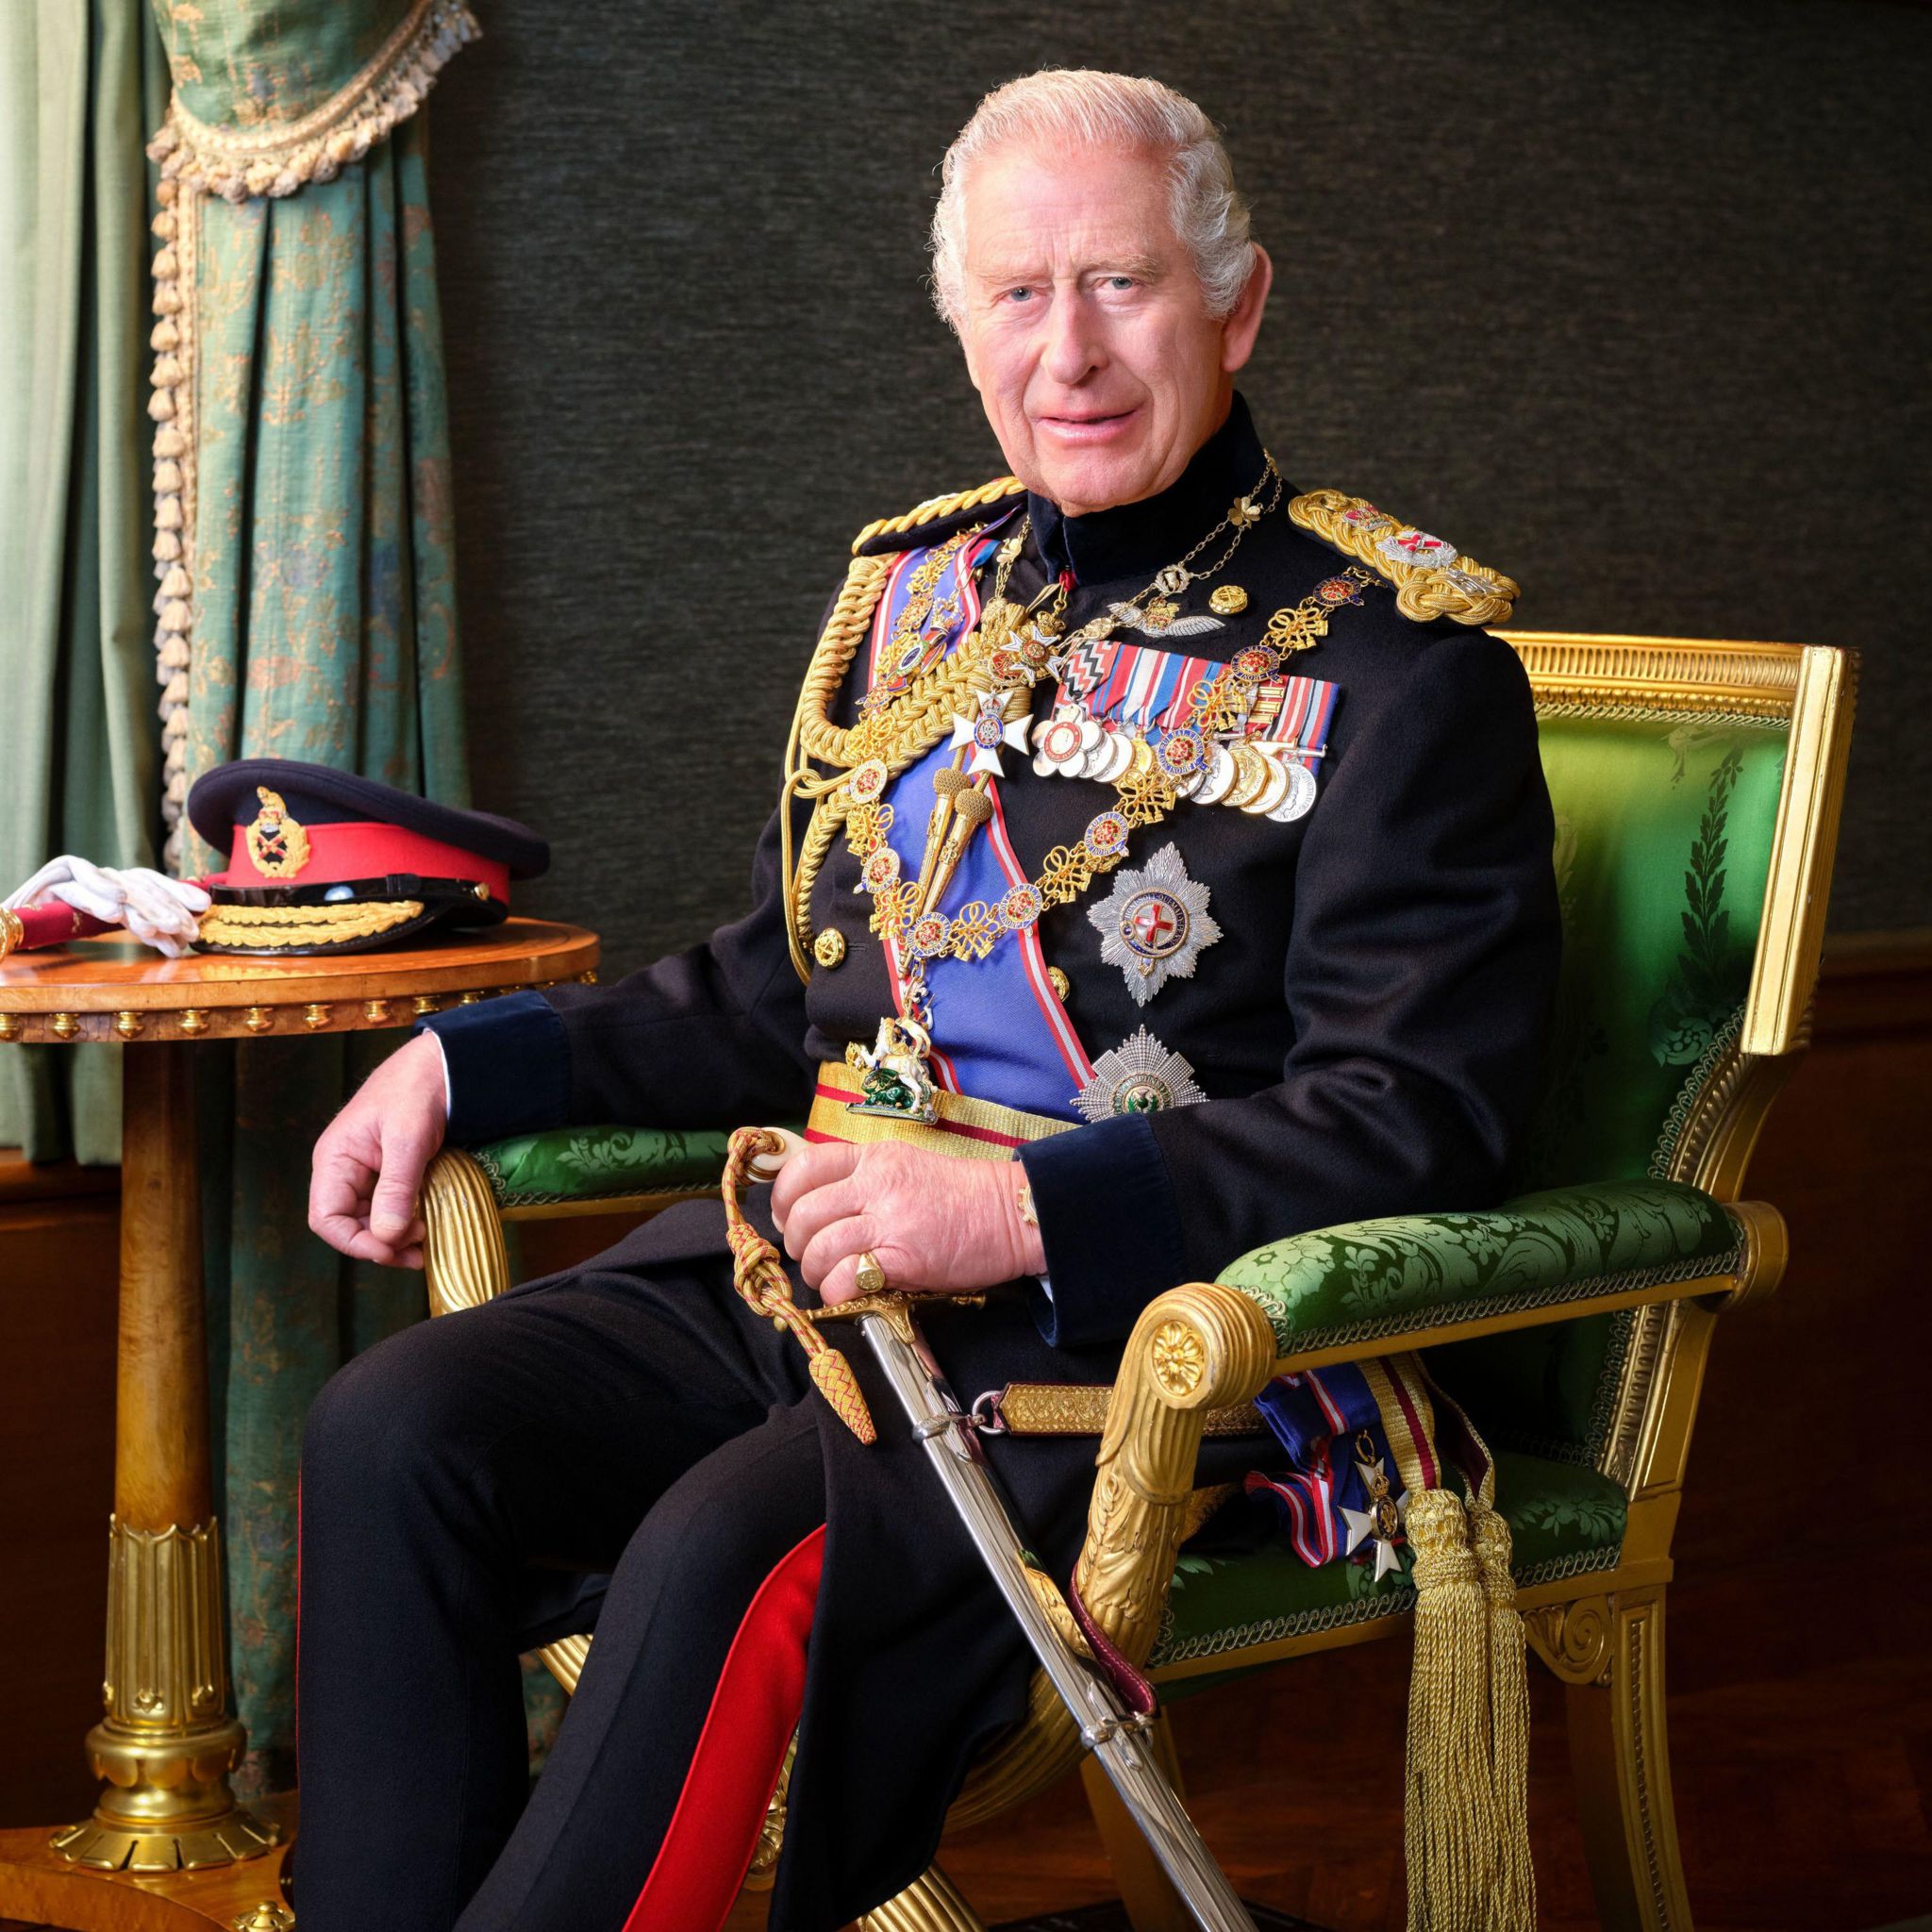 The photograph of King Charles, in which he is seated in ornate green and gold chair, wearing his full dress uniform with a ceremonial sword and ceremonial hat sitting on a table next to him